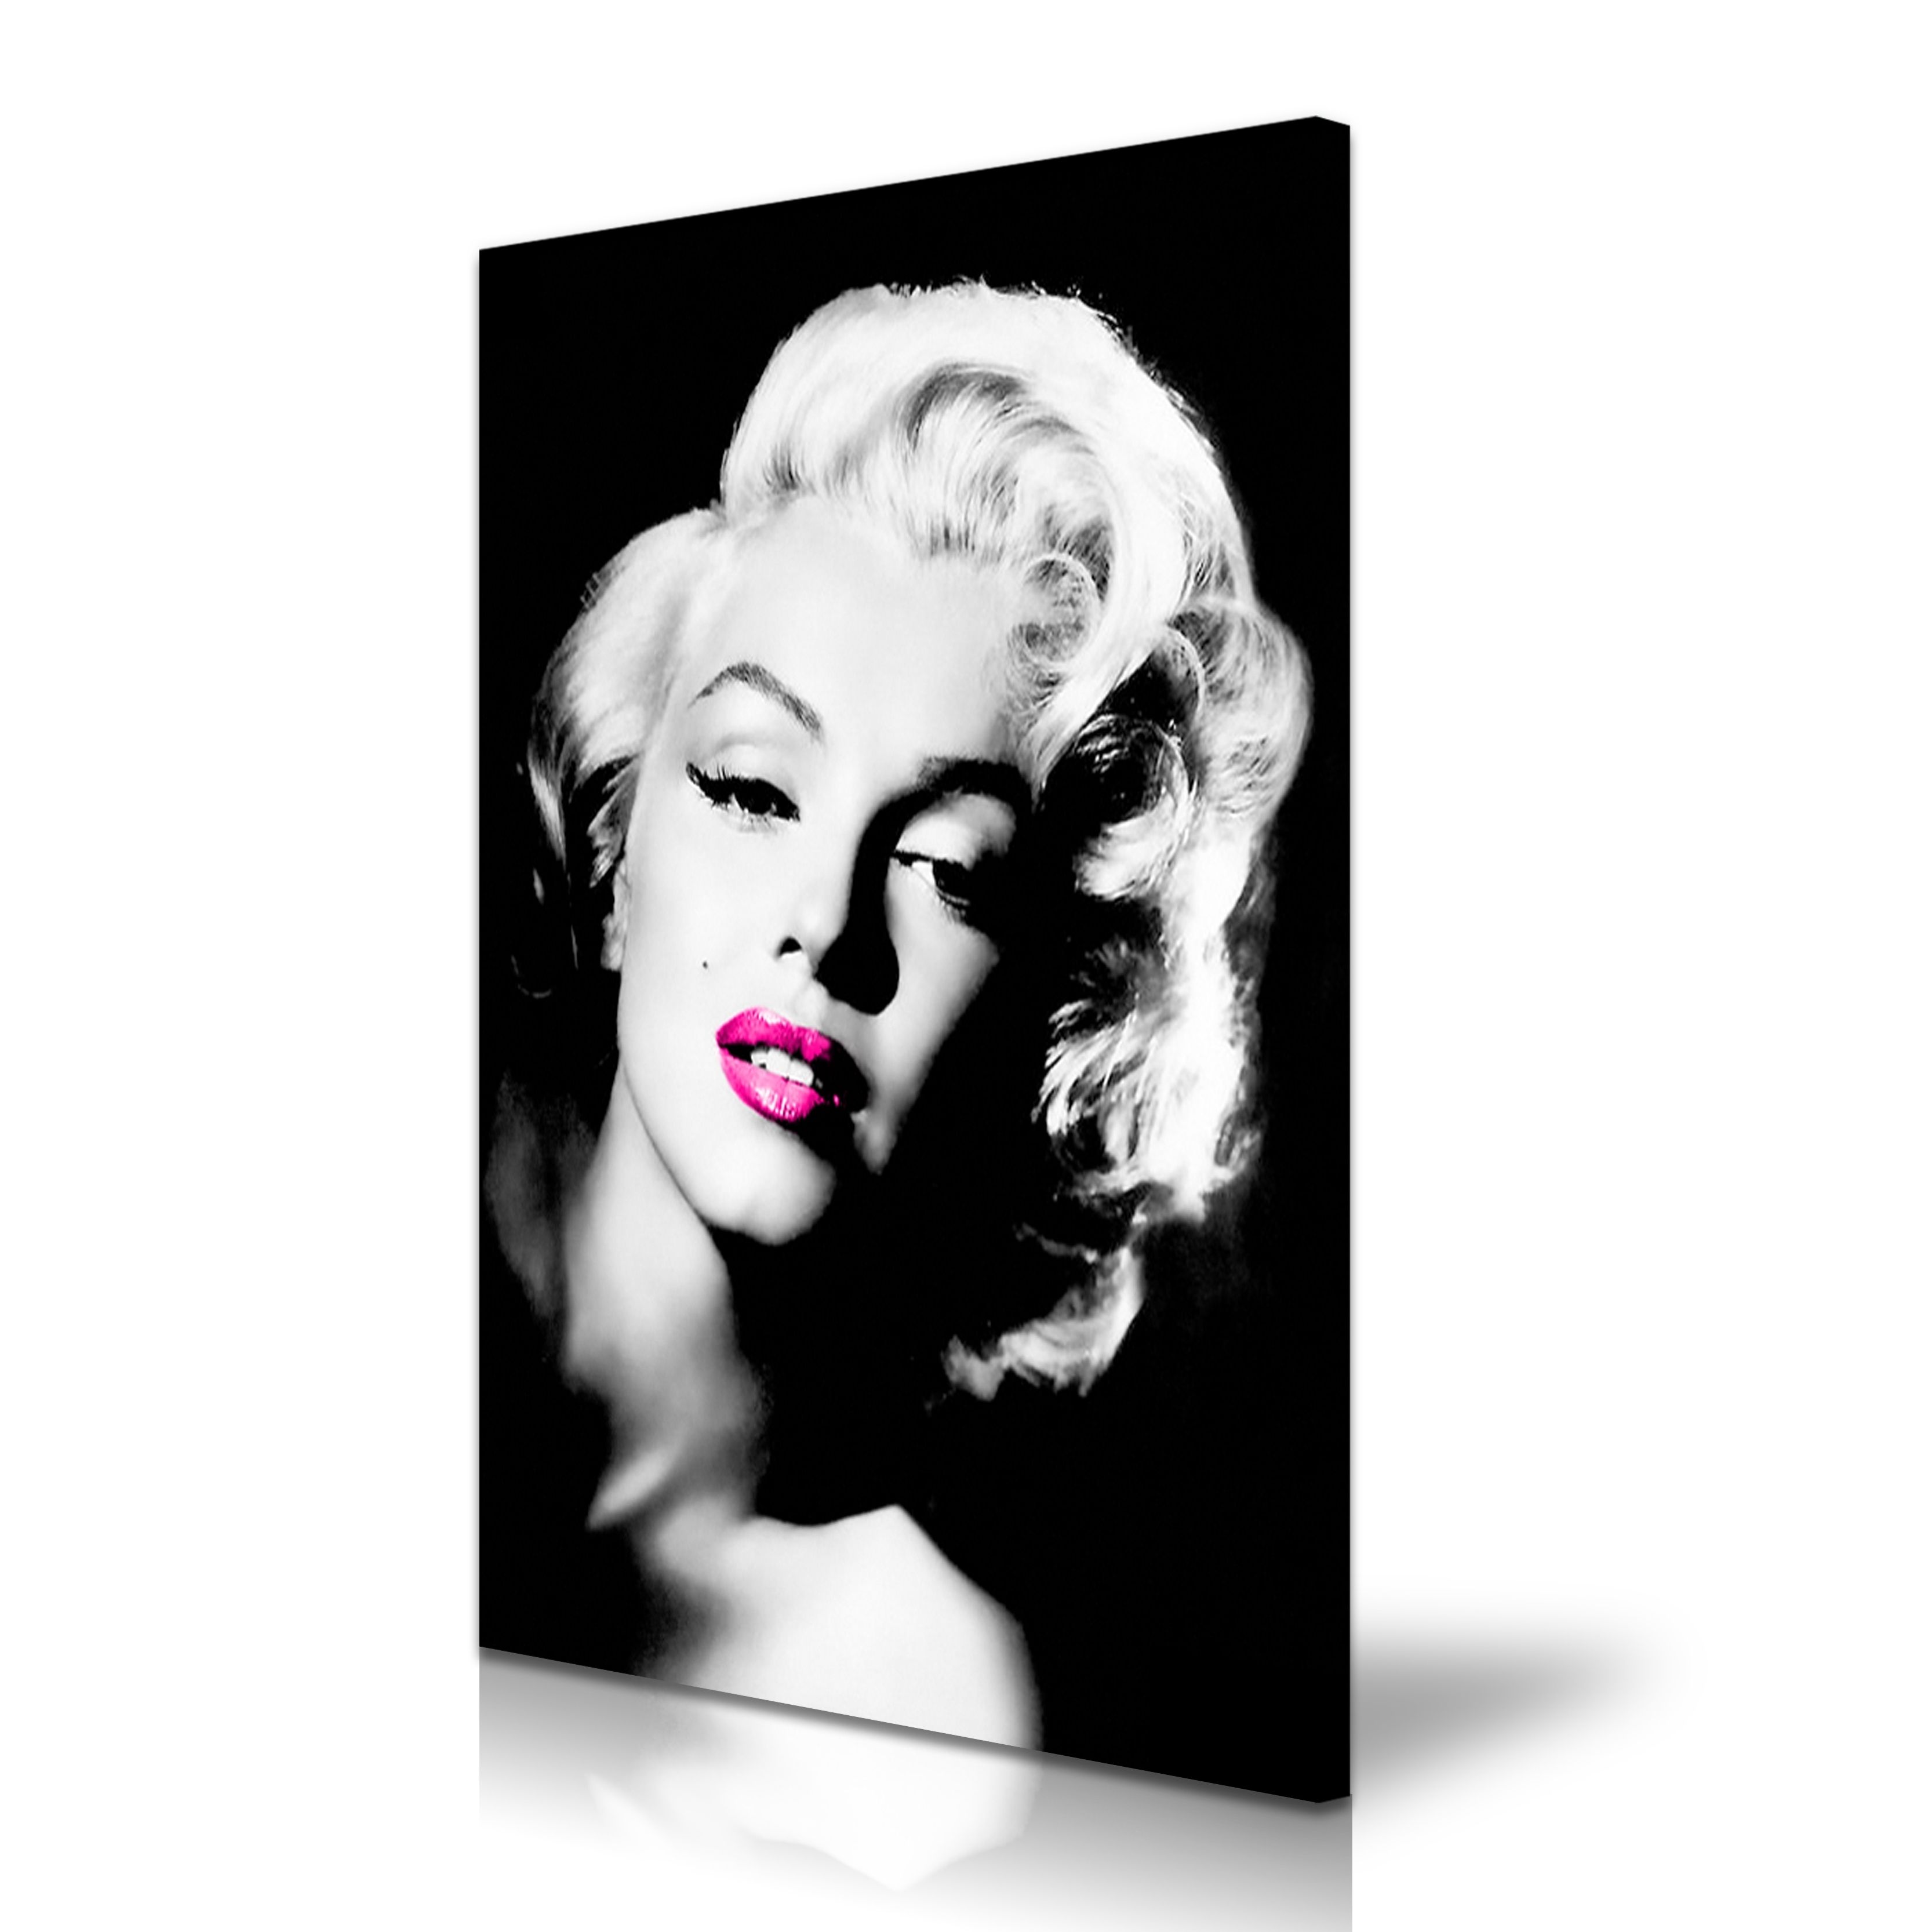 Marilyn Monroe Black And White Wall Art Pertaining To Latest 15 Black And White Marilyn Monroe Framed Pictures Selection (View 1 of 15)